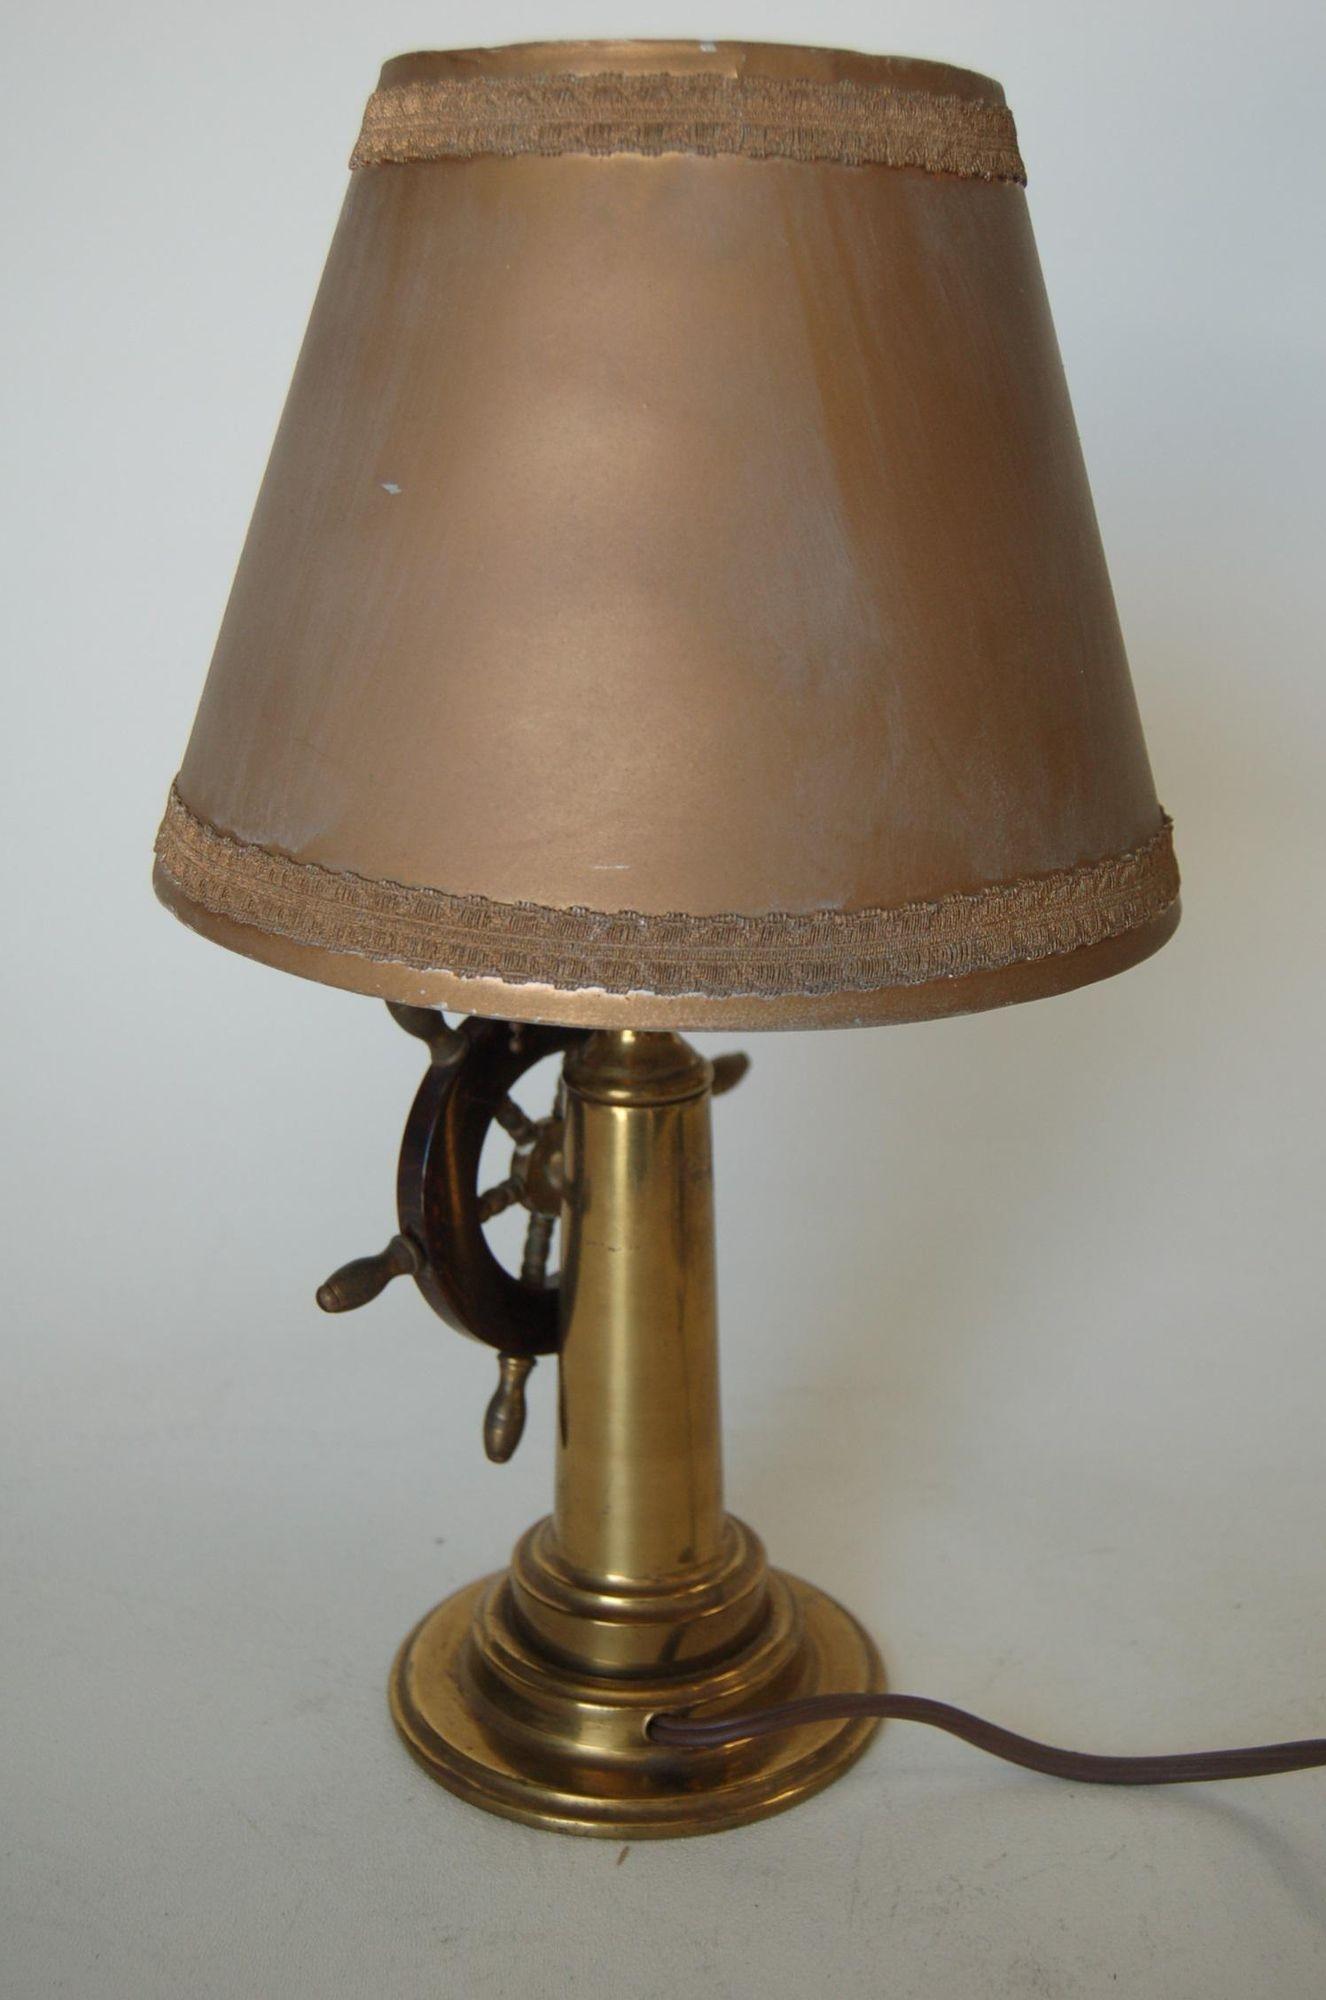 1950s Brass And Bakelite Ships Wheel Accent Table Lamp With Pull Chain. Measures 14